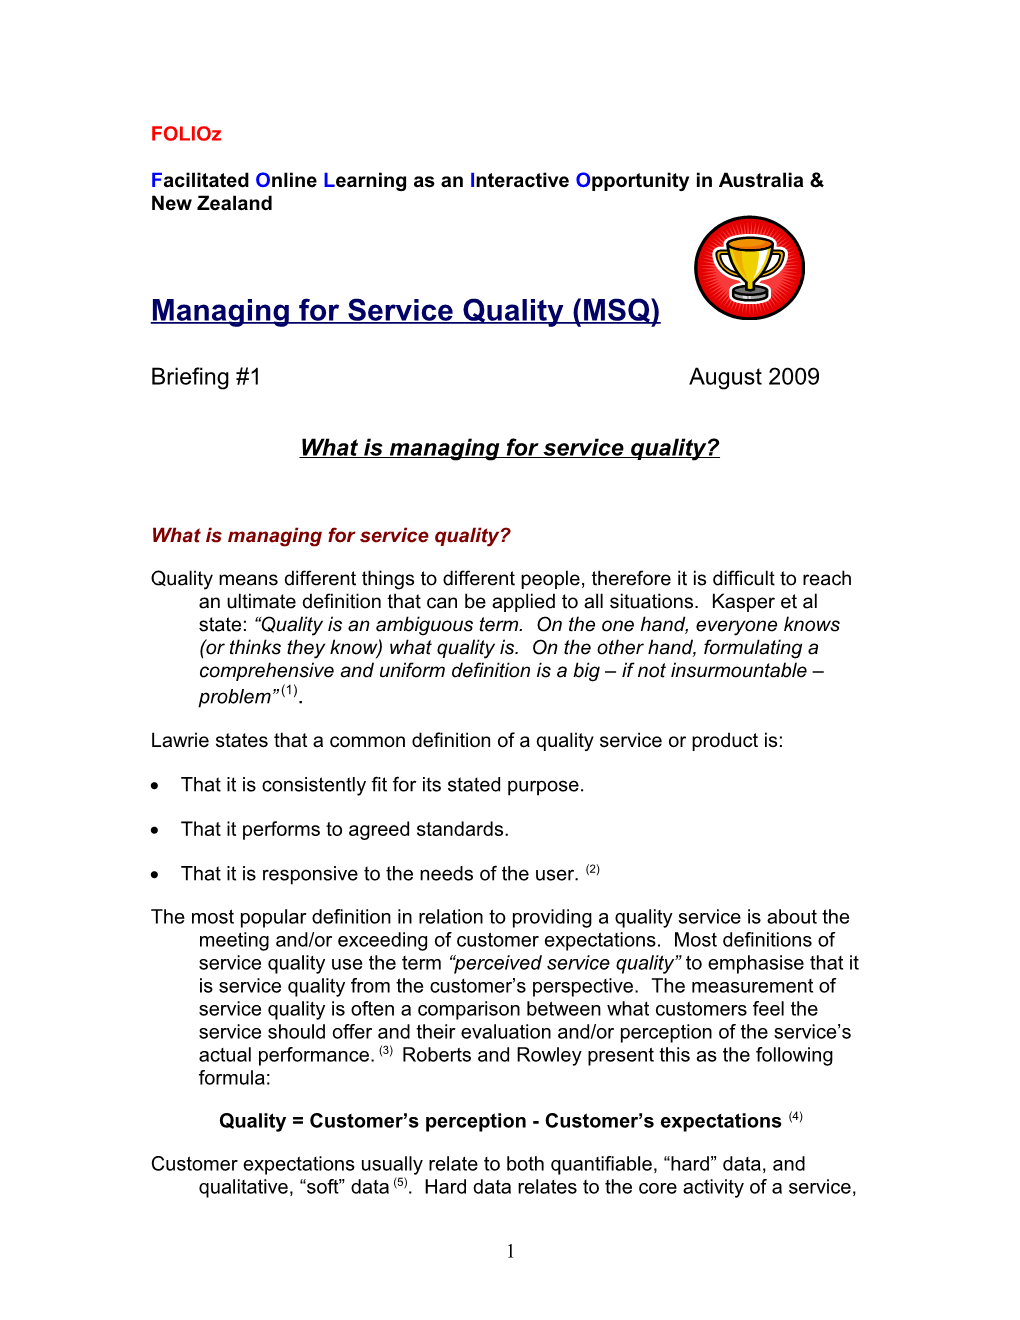 What Is Managing for Service Quality?